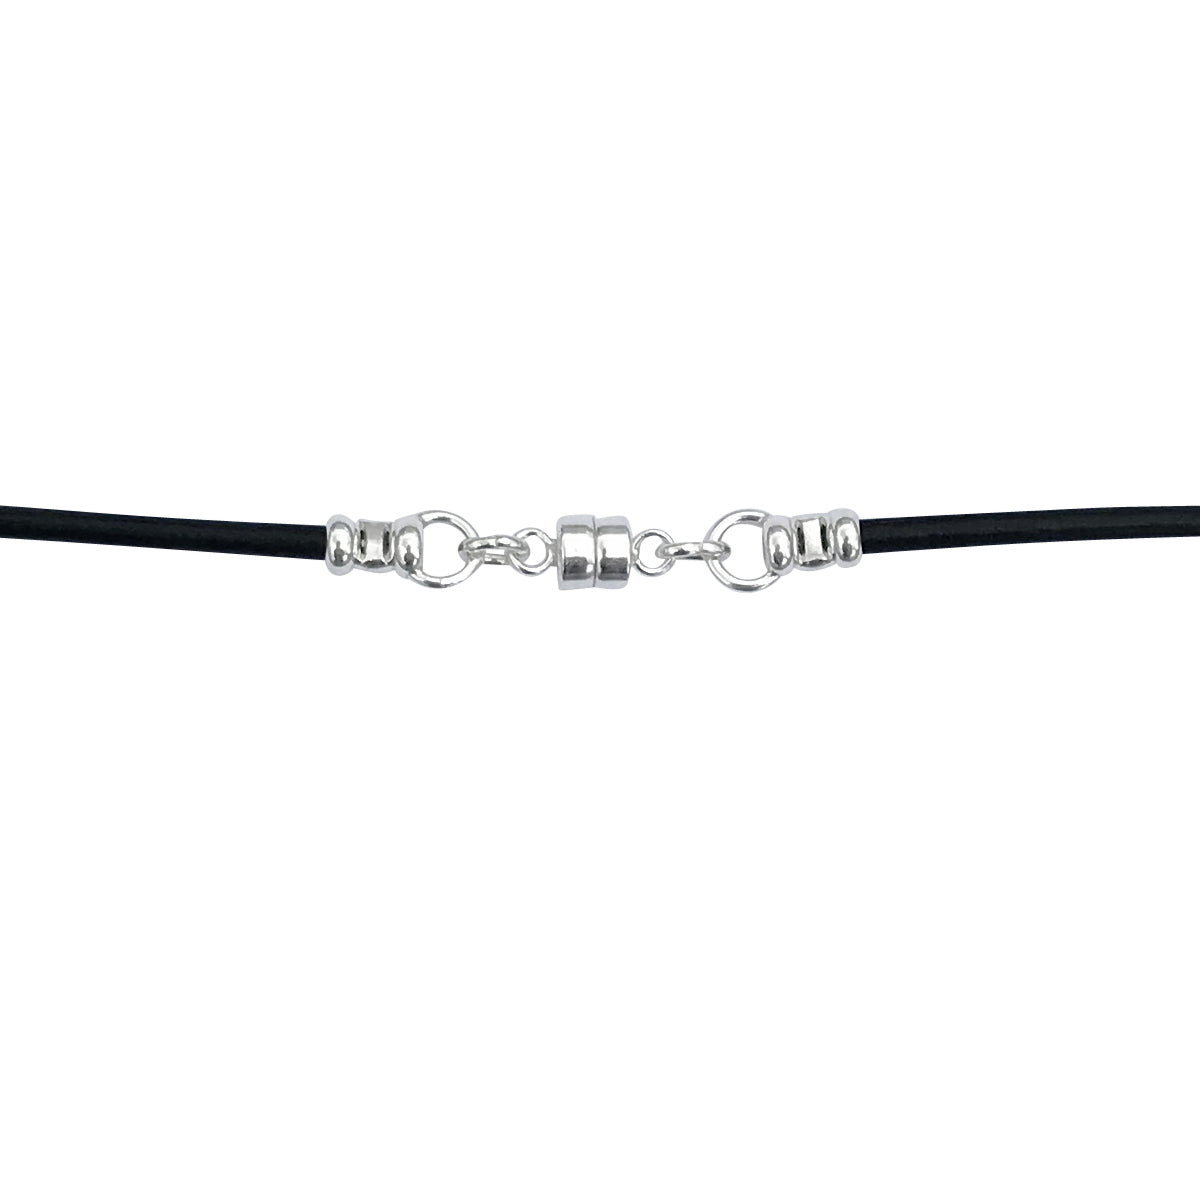 Black Nylon Necklace Cord with Breakaway Clasp – Essential Energy